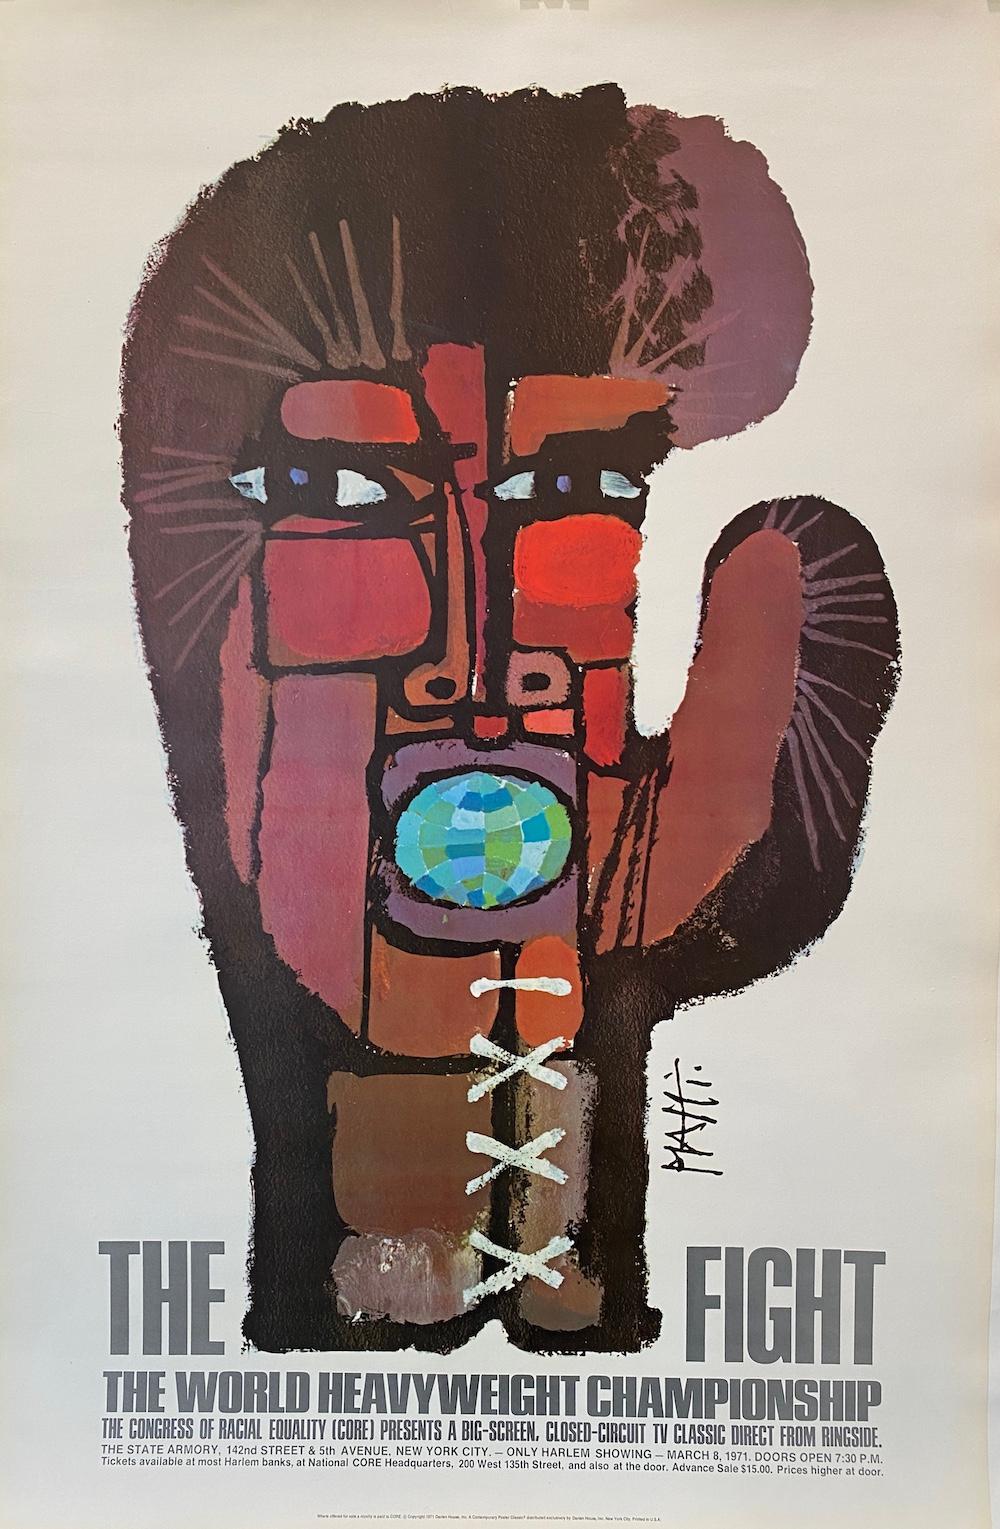 Muhammad Ali 'THE WORLD HEAVYWEIGHT CHAMPIONSHIP' Original Vintage Poster, 1971

This poster is a clever design by the Swiss poster artist, Piatti, of Muhammad Ali when he participated in the World Heavyweight Championship, as the boxing glove